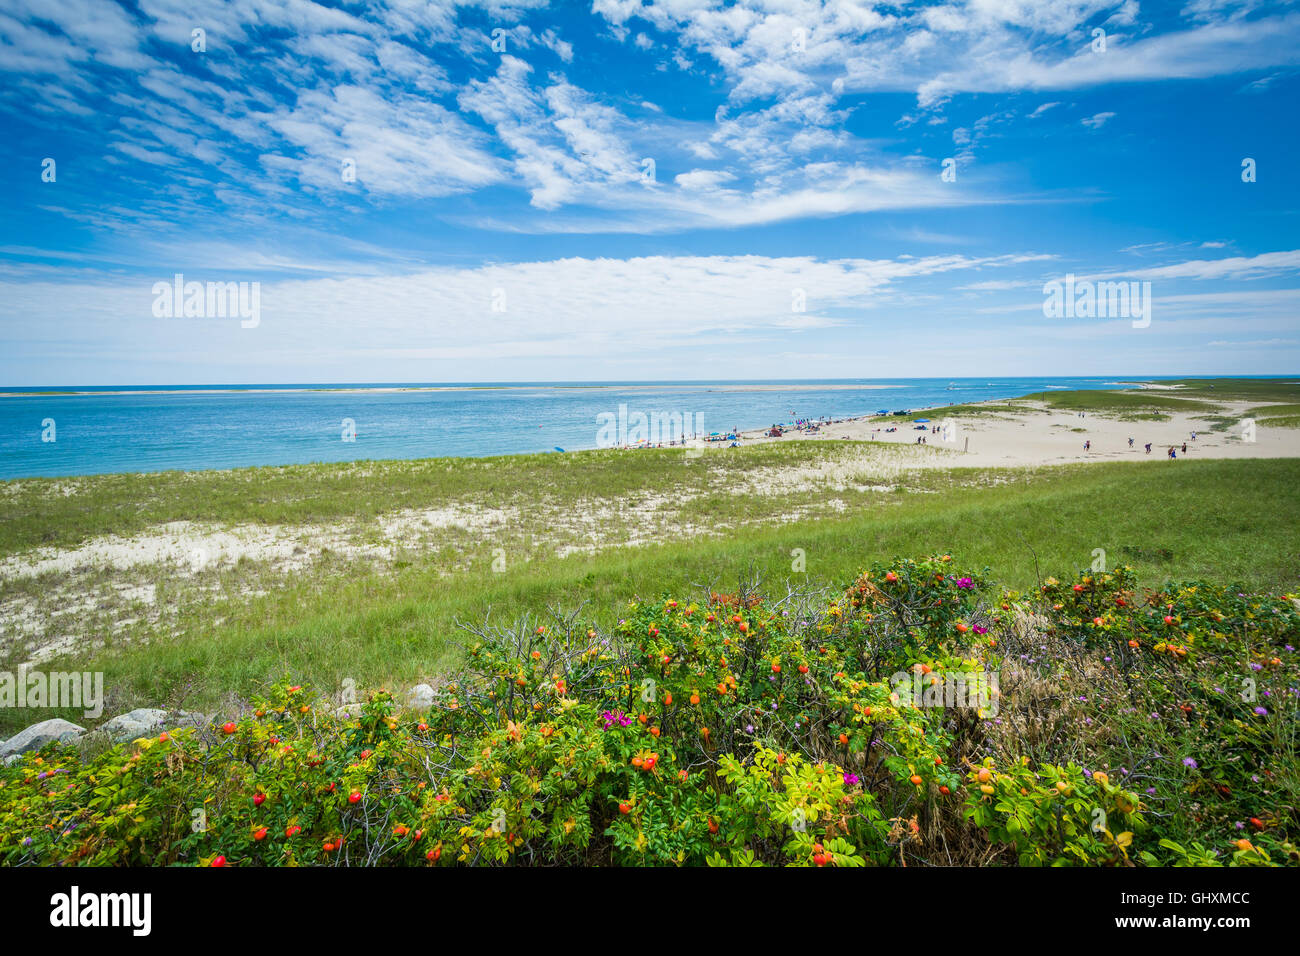 View of a beach in  Chatham, Cape Cod, Massachusetts. Stock Photo